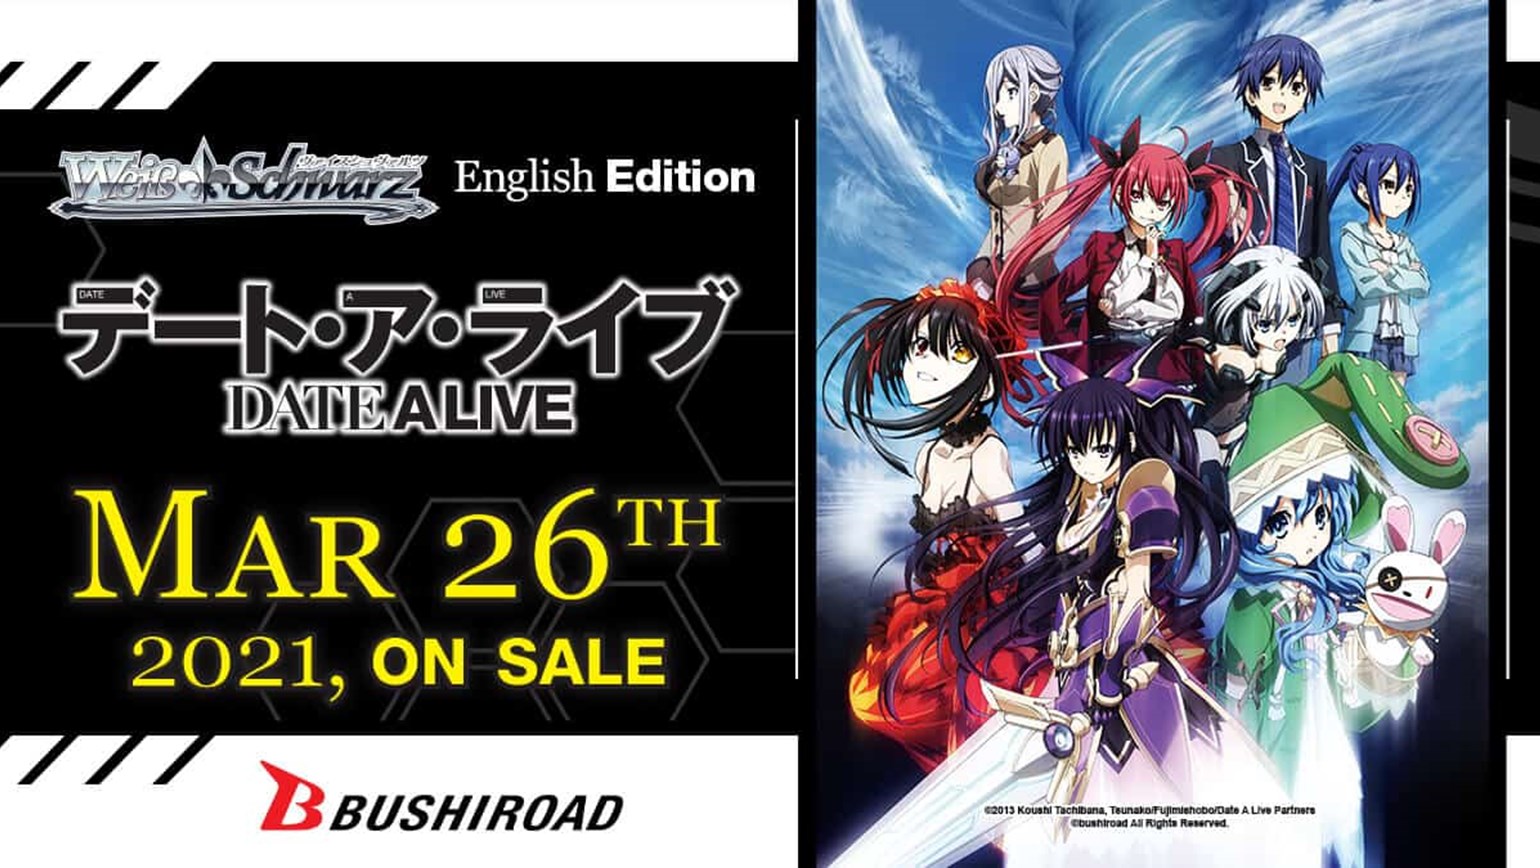 Weiss Schwarz: Date A Live Hits Your FLGS Shelves March 26th!